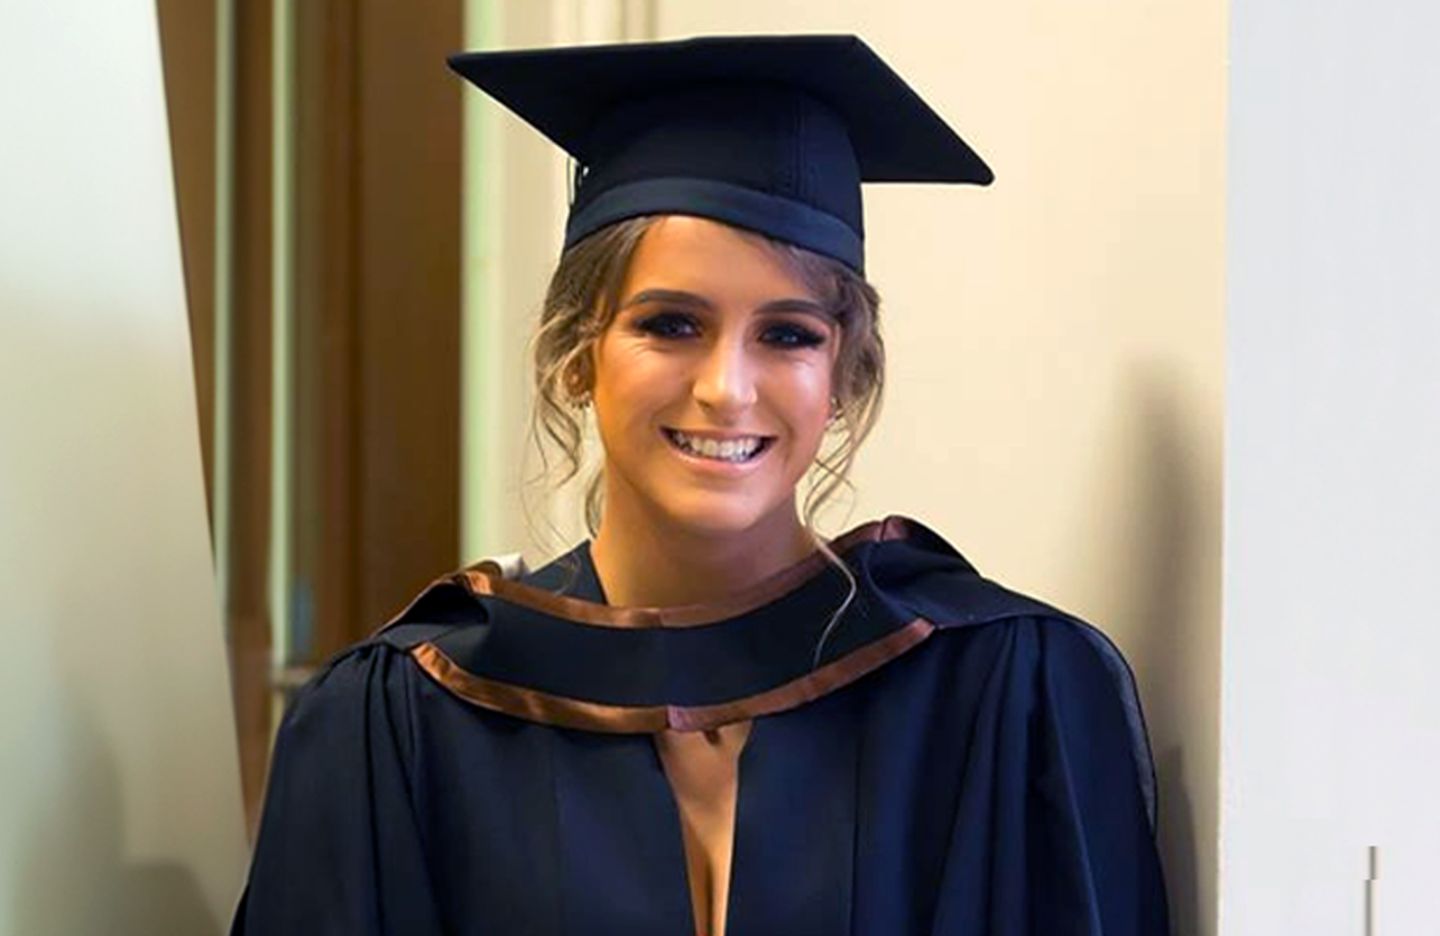 Thorough research helped SETU graduate Áine realise Waterford was the place for her